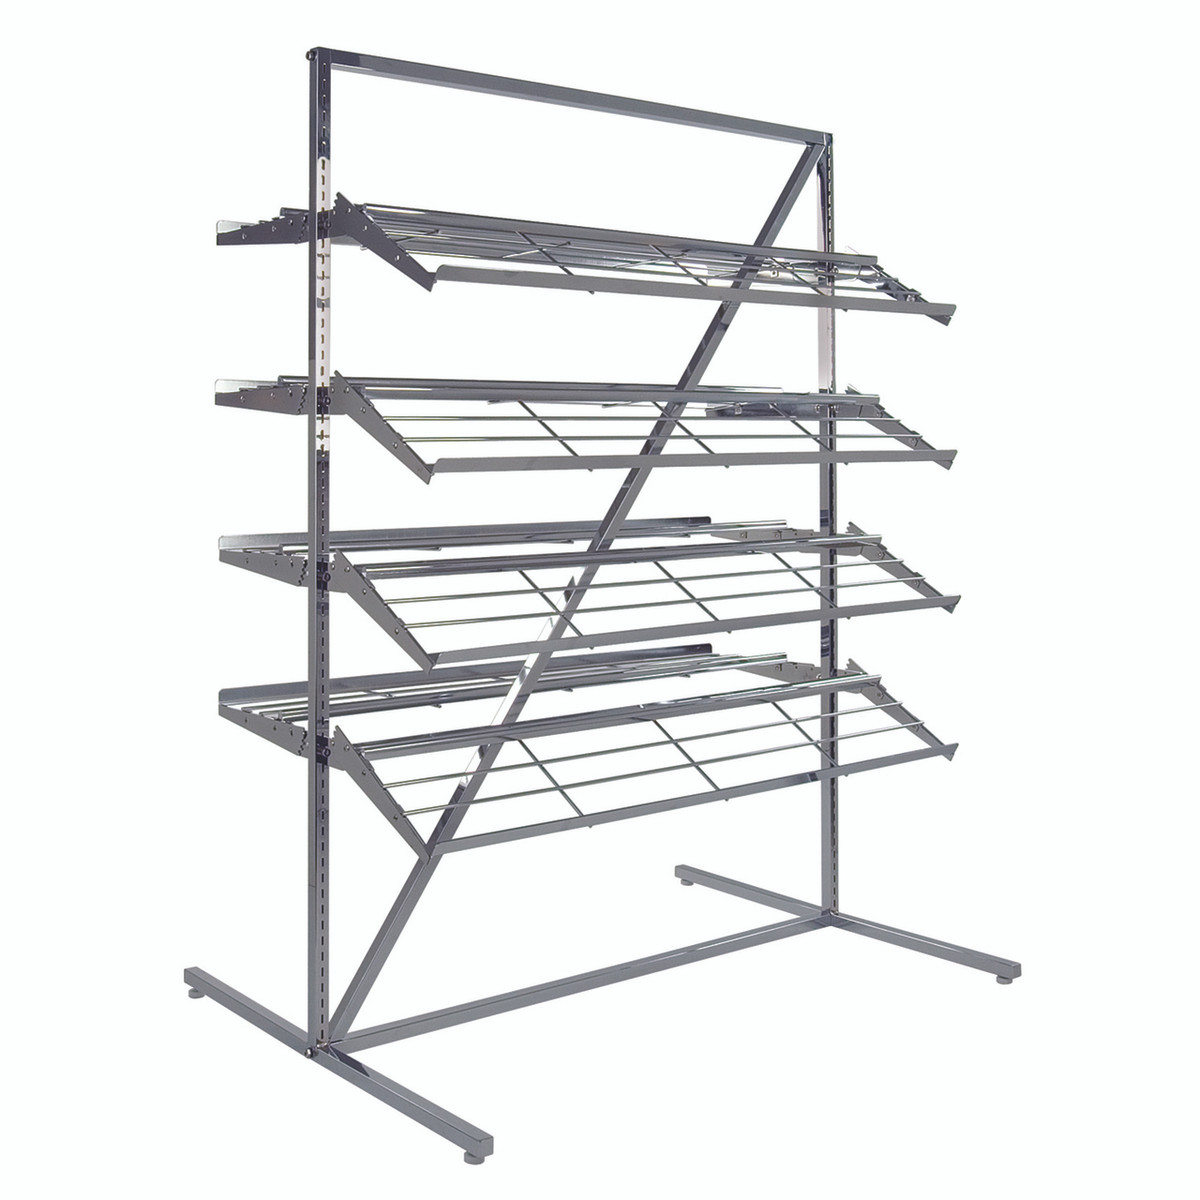 https://cdn11.bigcommerce.com/s-u7ds2t/images/stencil/1200x1200/products/109/4675/Shoe_Rack_Display_with_8_Shelves_2_Sided_CHROME__34625.1453480972.jpg?c=2